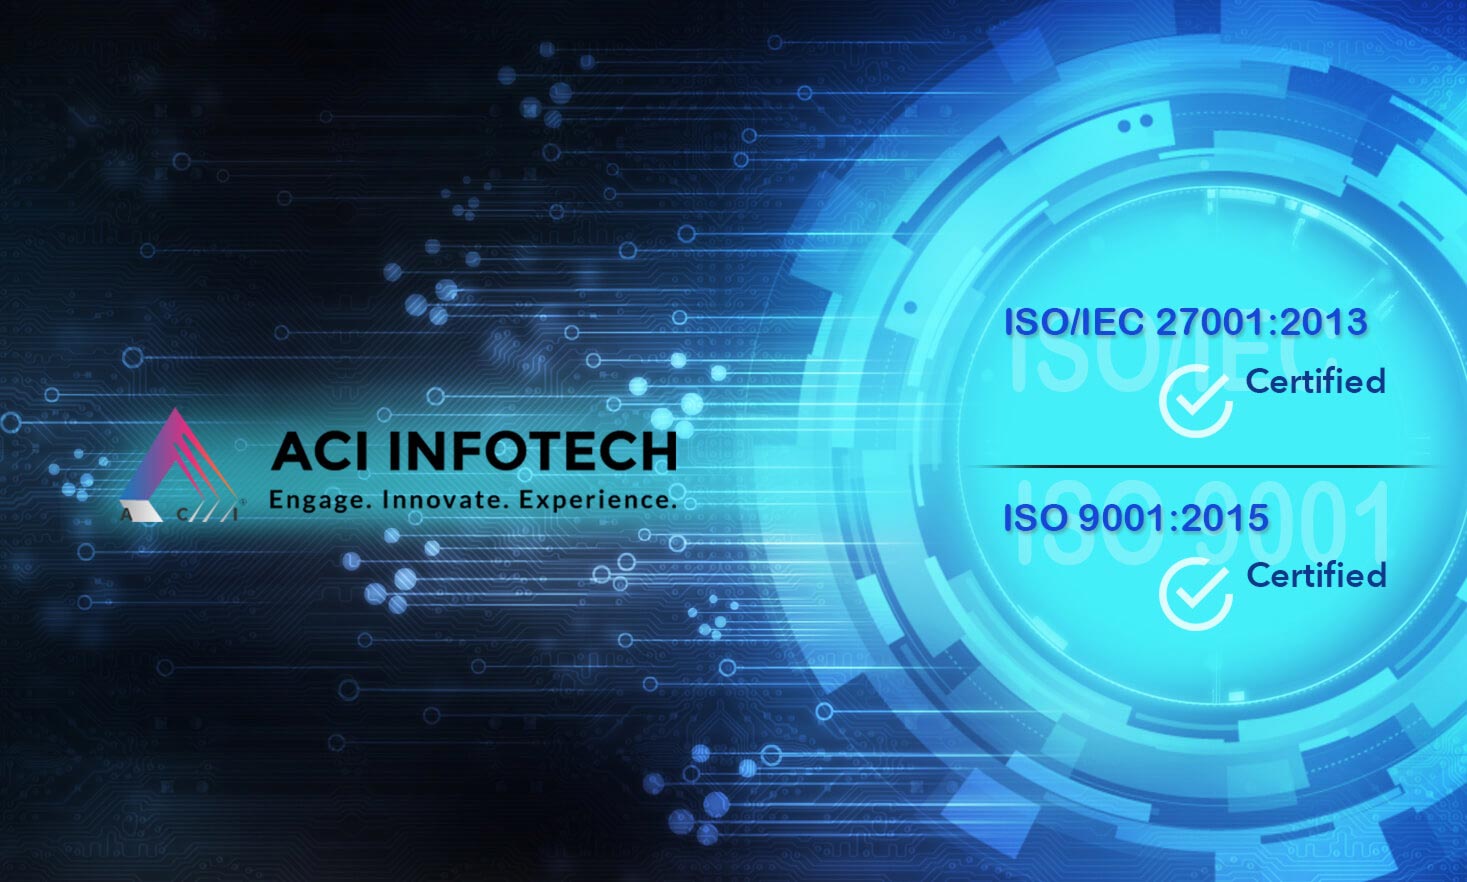 ACI Infotech Achieves ISO 27001 & 9001 Certifications